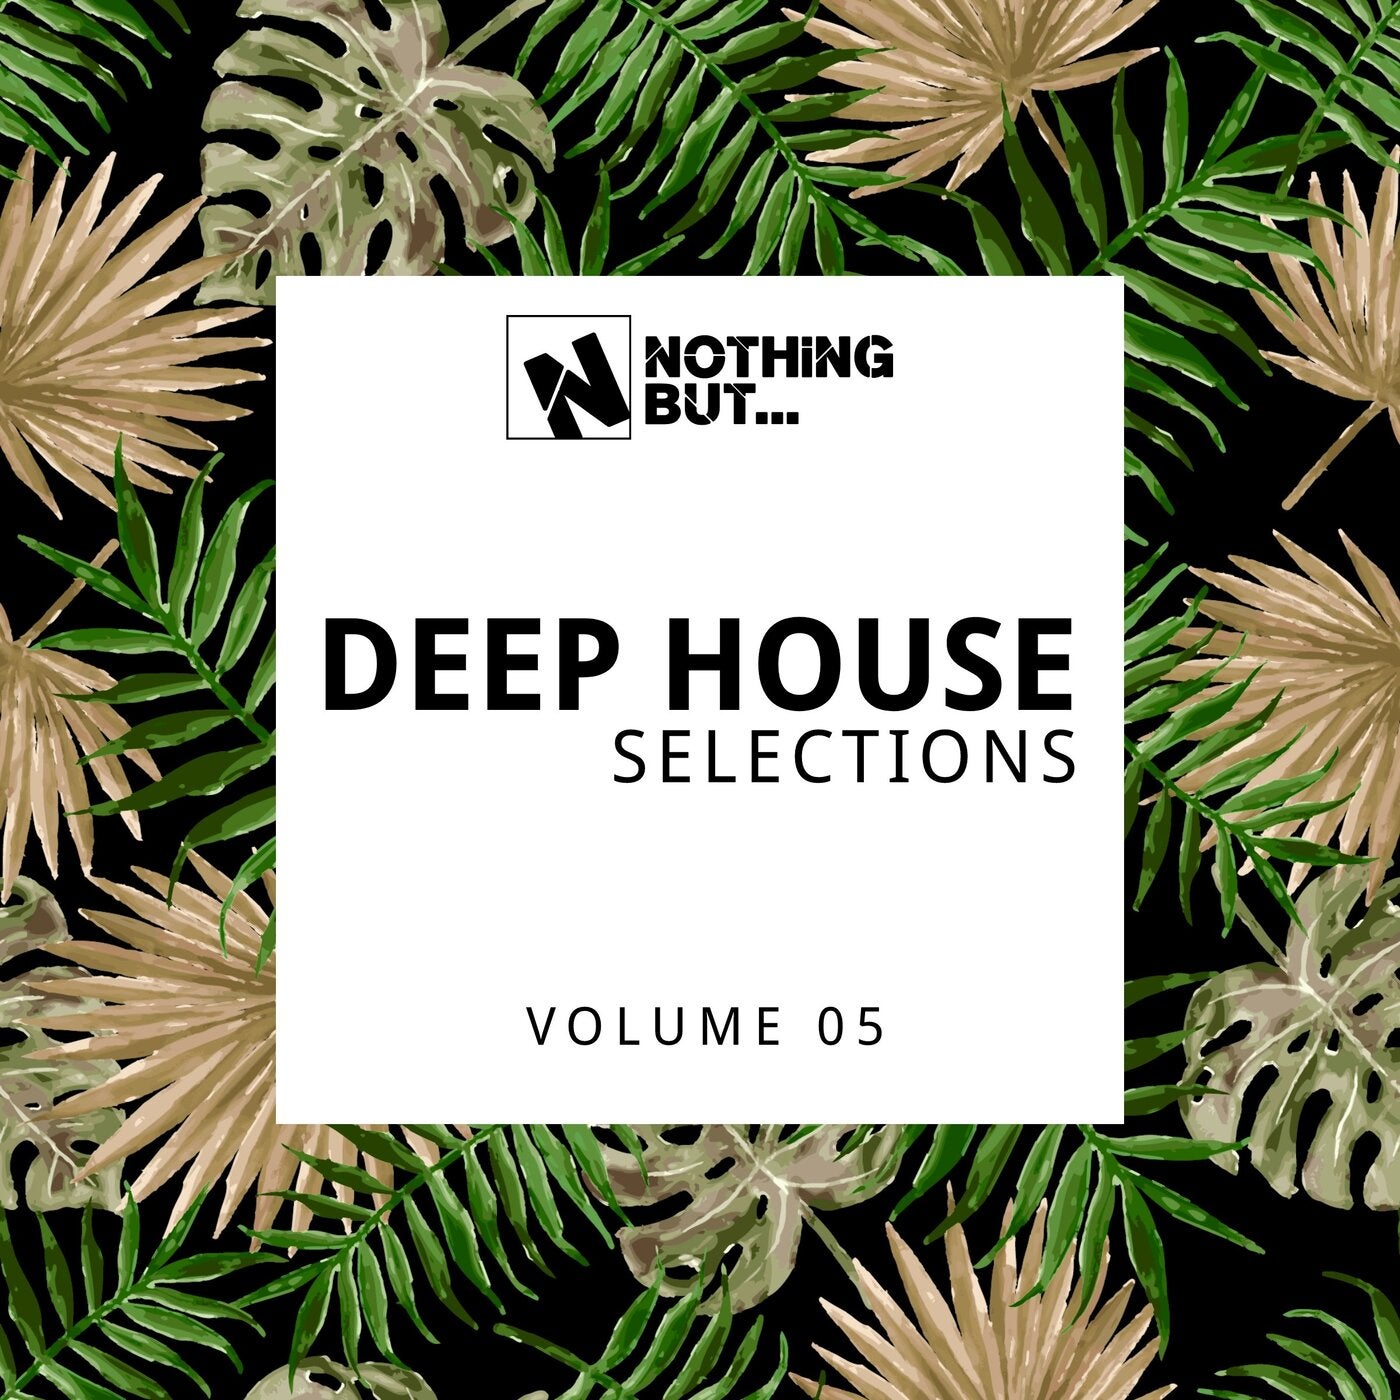 VA – Nothing But… Deep House Selections, Vol. 05 [NBDHS05]